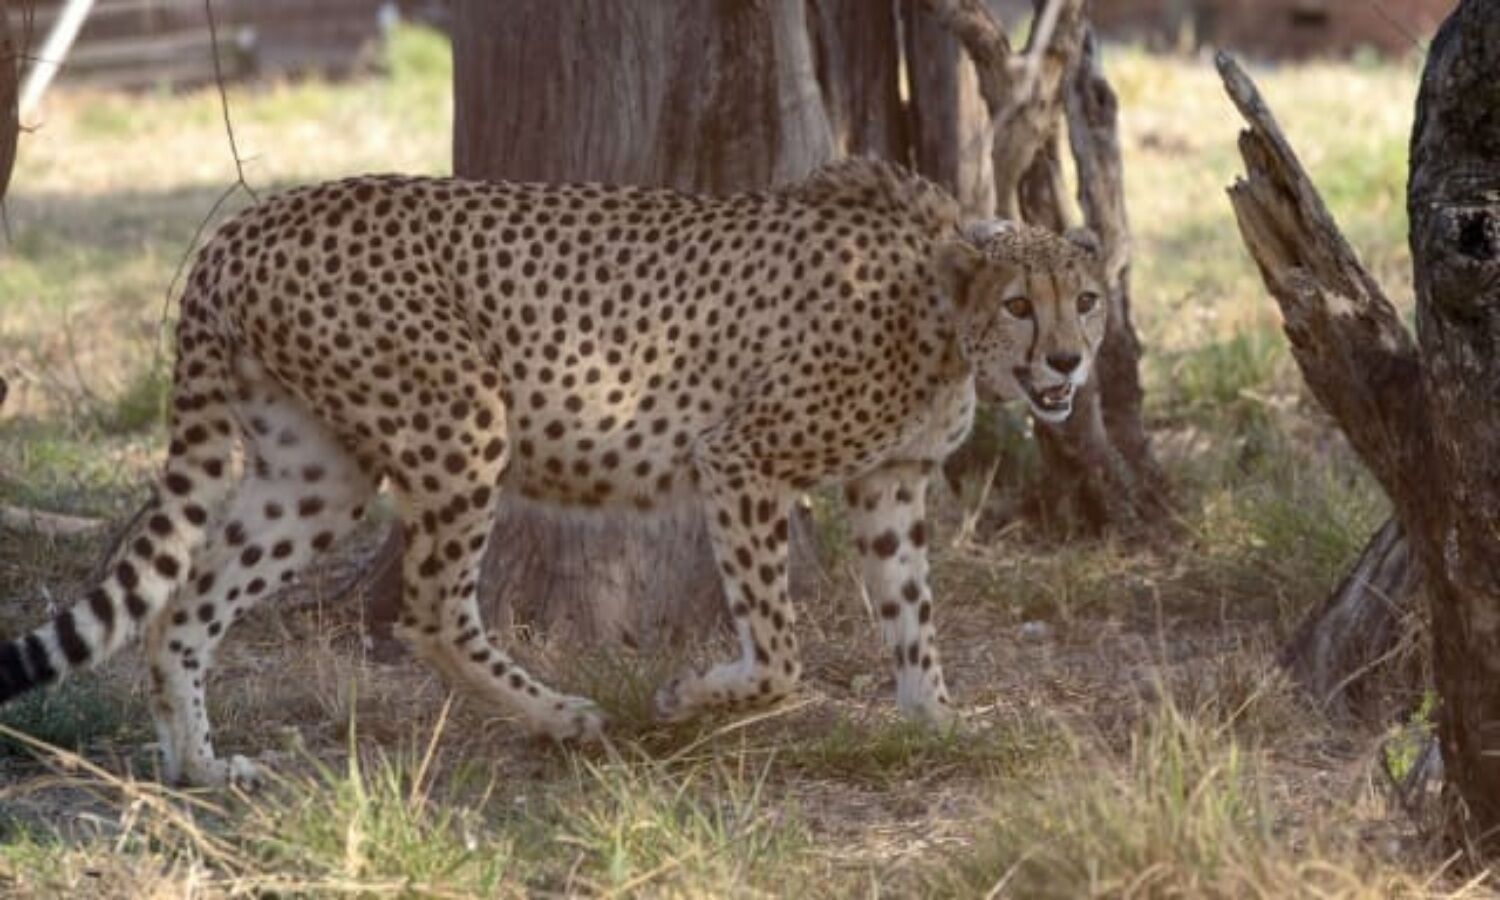 Cheetah Project in MP: Why were cheetahs brought to India, know the full story behind it